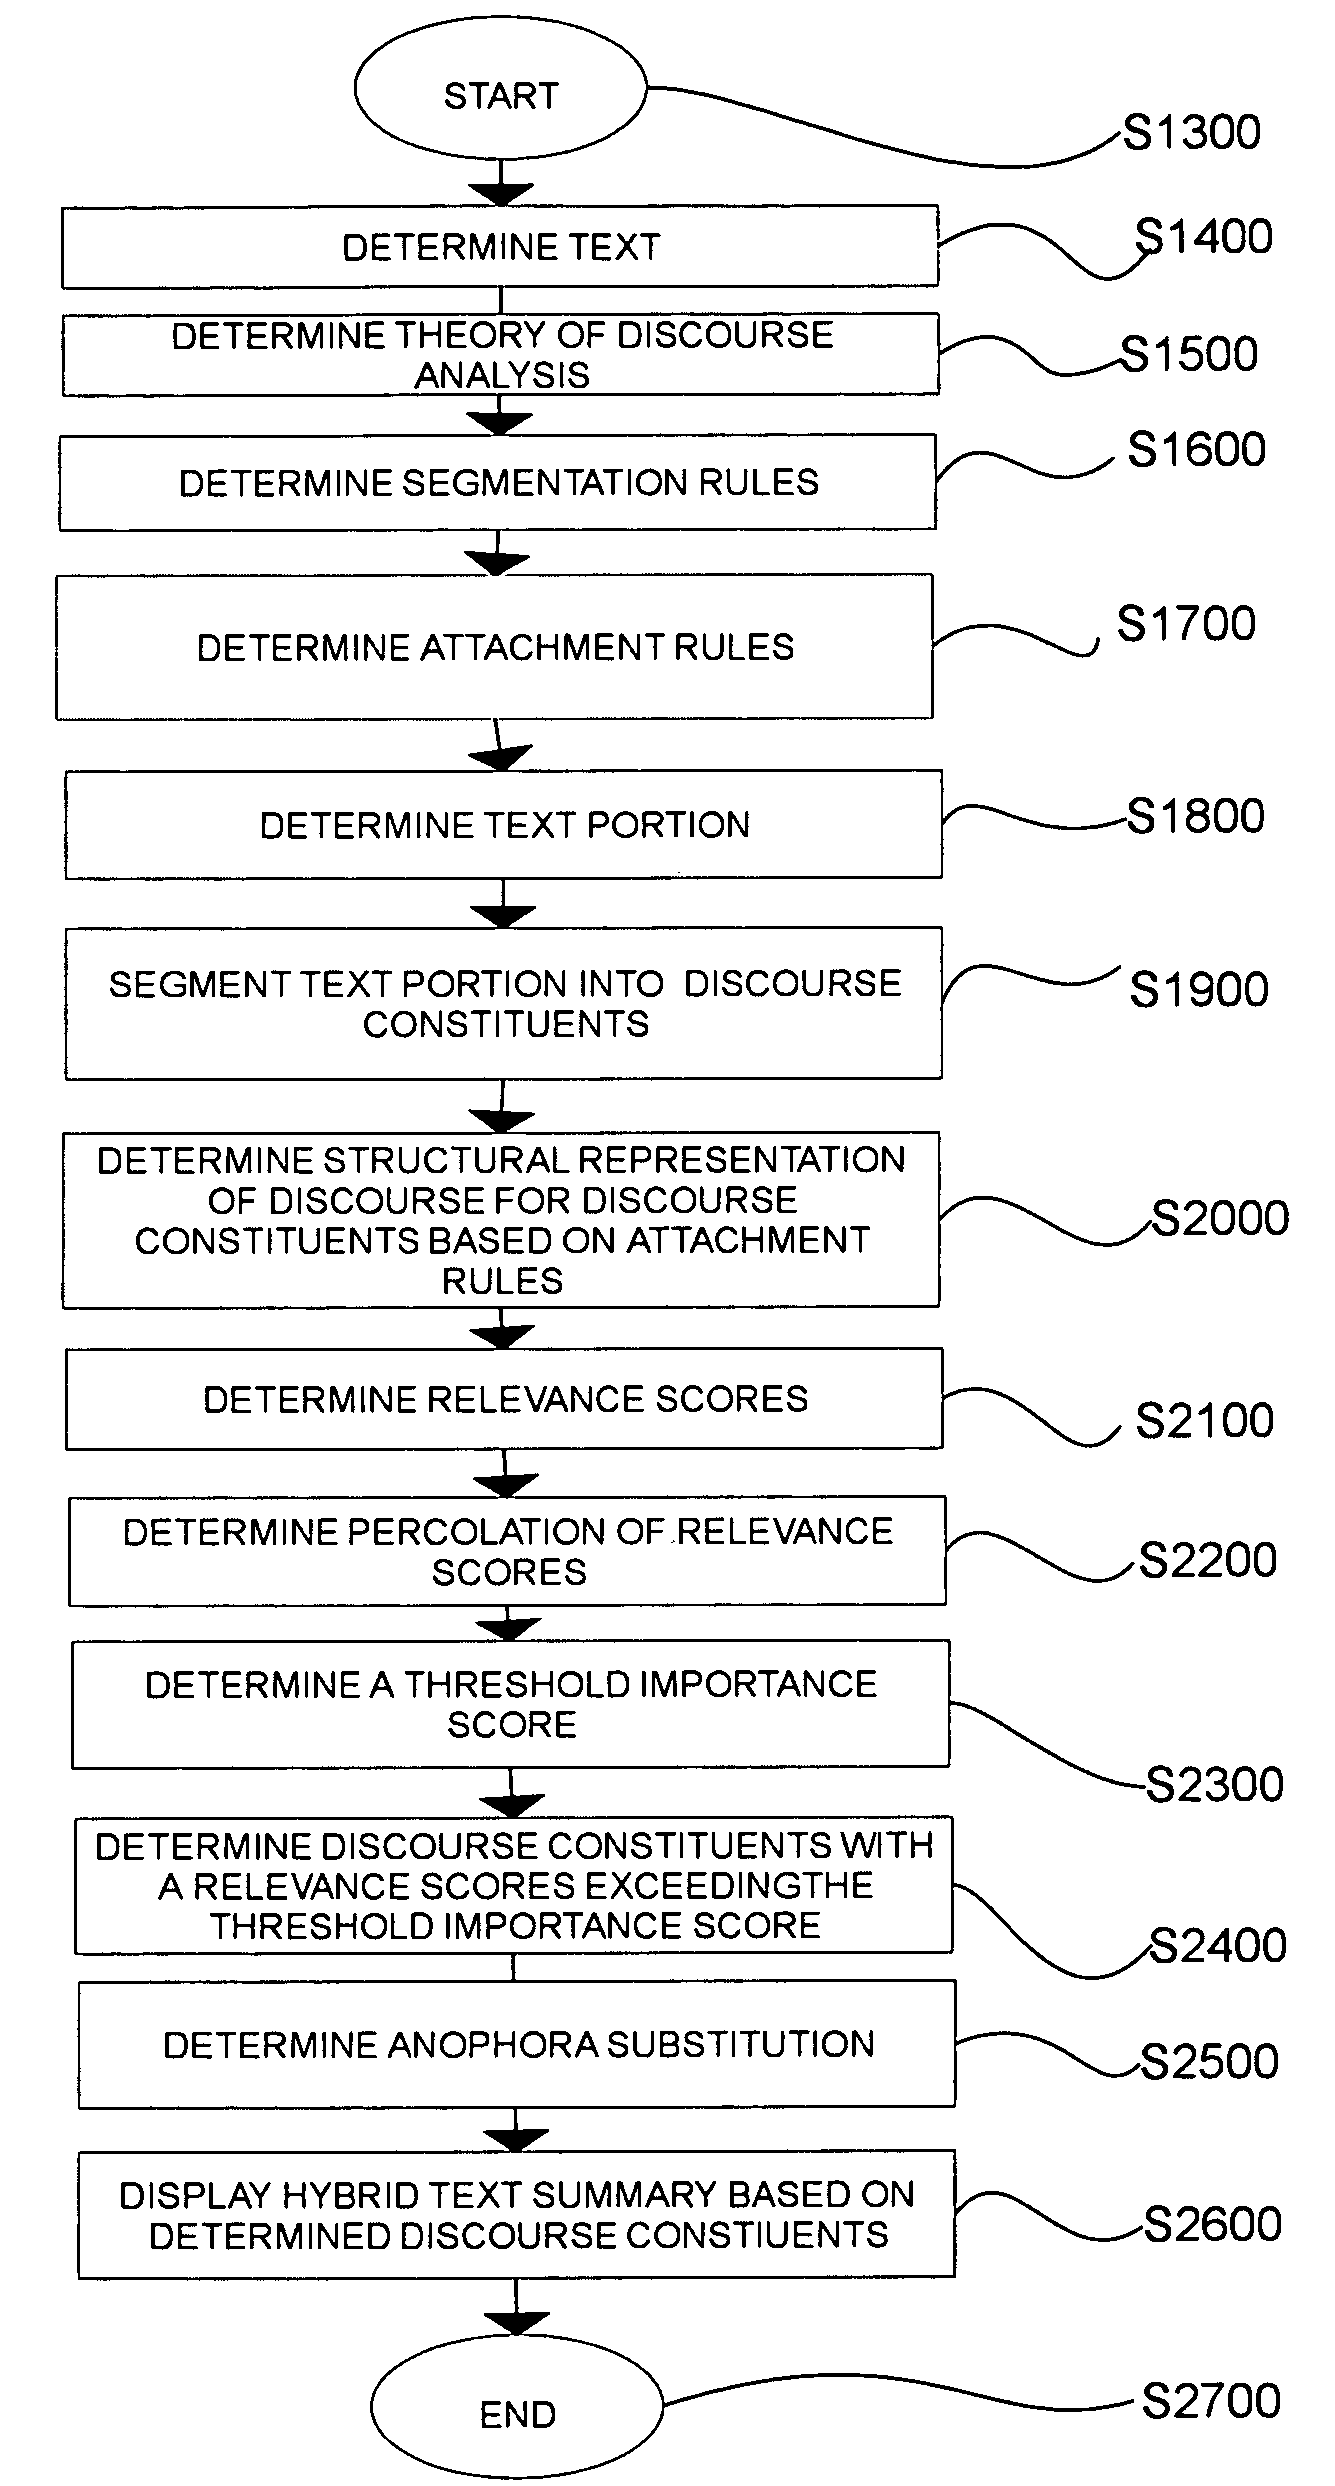 Systems and methods for hybrid text summarization